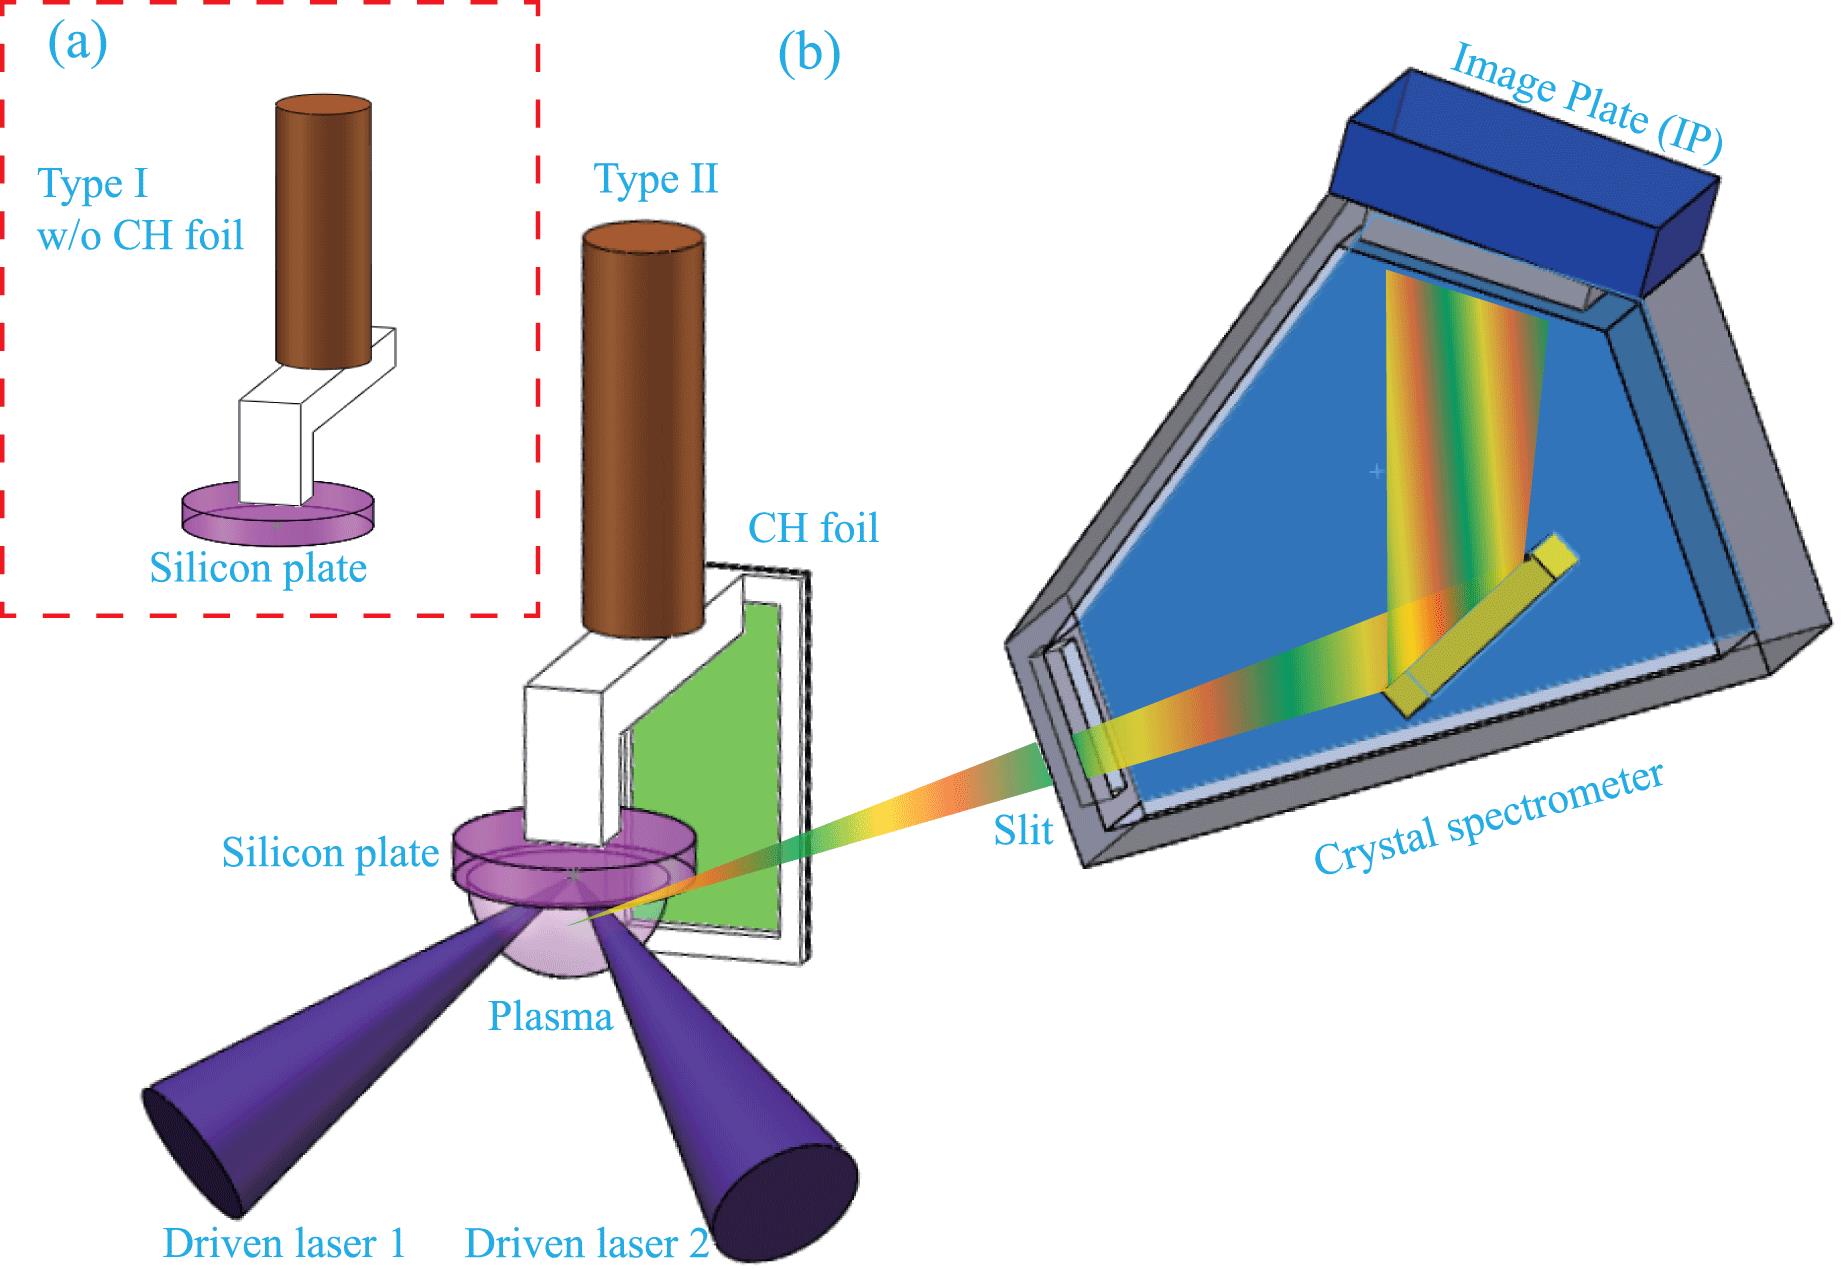 Two types of targets and schematic diagram of the experimental setups. (a) The Type I target. (b) The Type II shot and the schematic diagram of the experimental setups. The silicon plate is set at the target chamber center (TCC), and two driven laser beams are focused on it. A crystal spectrometer is used to record the spectrum of plasma.